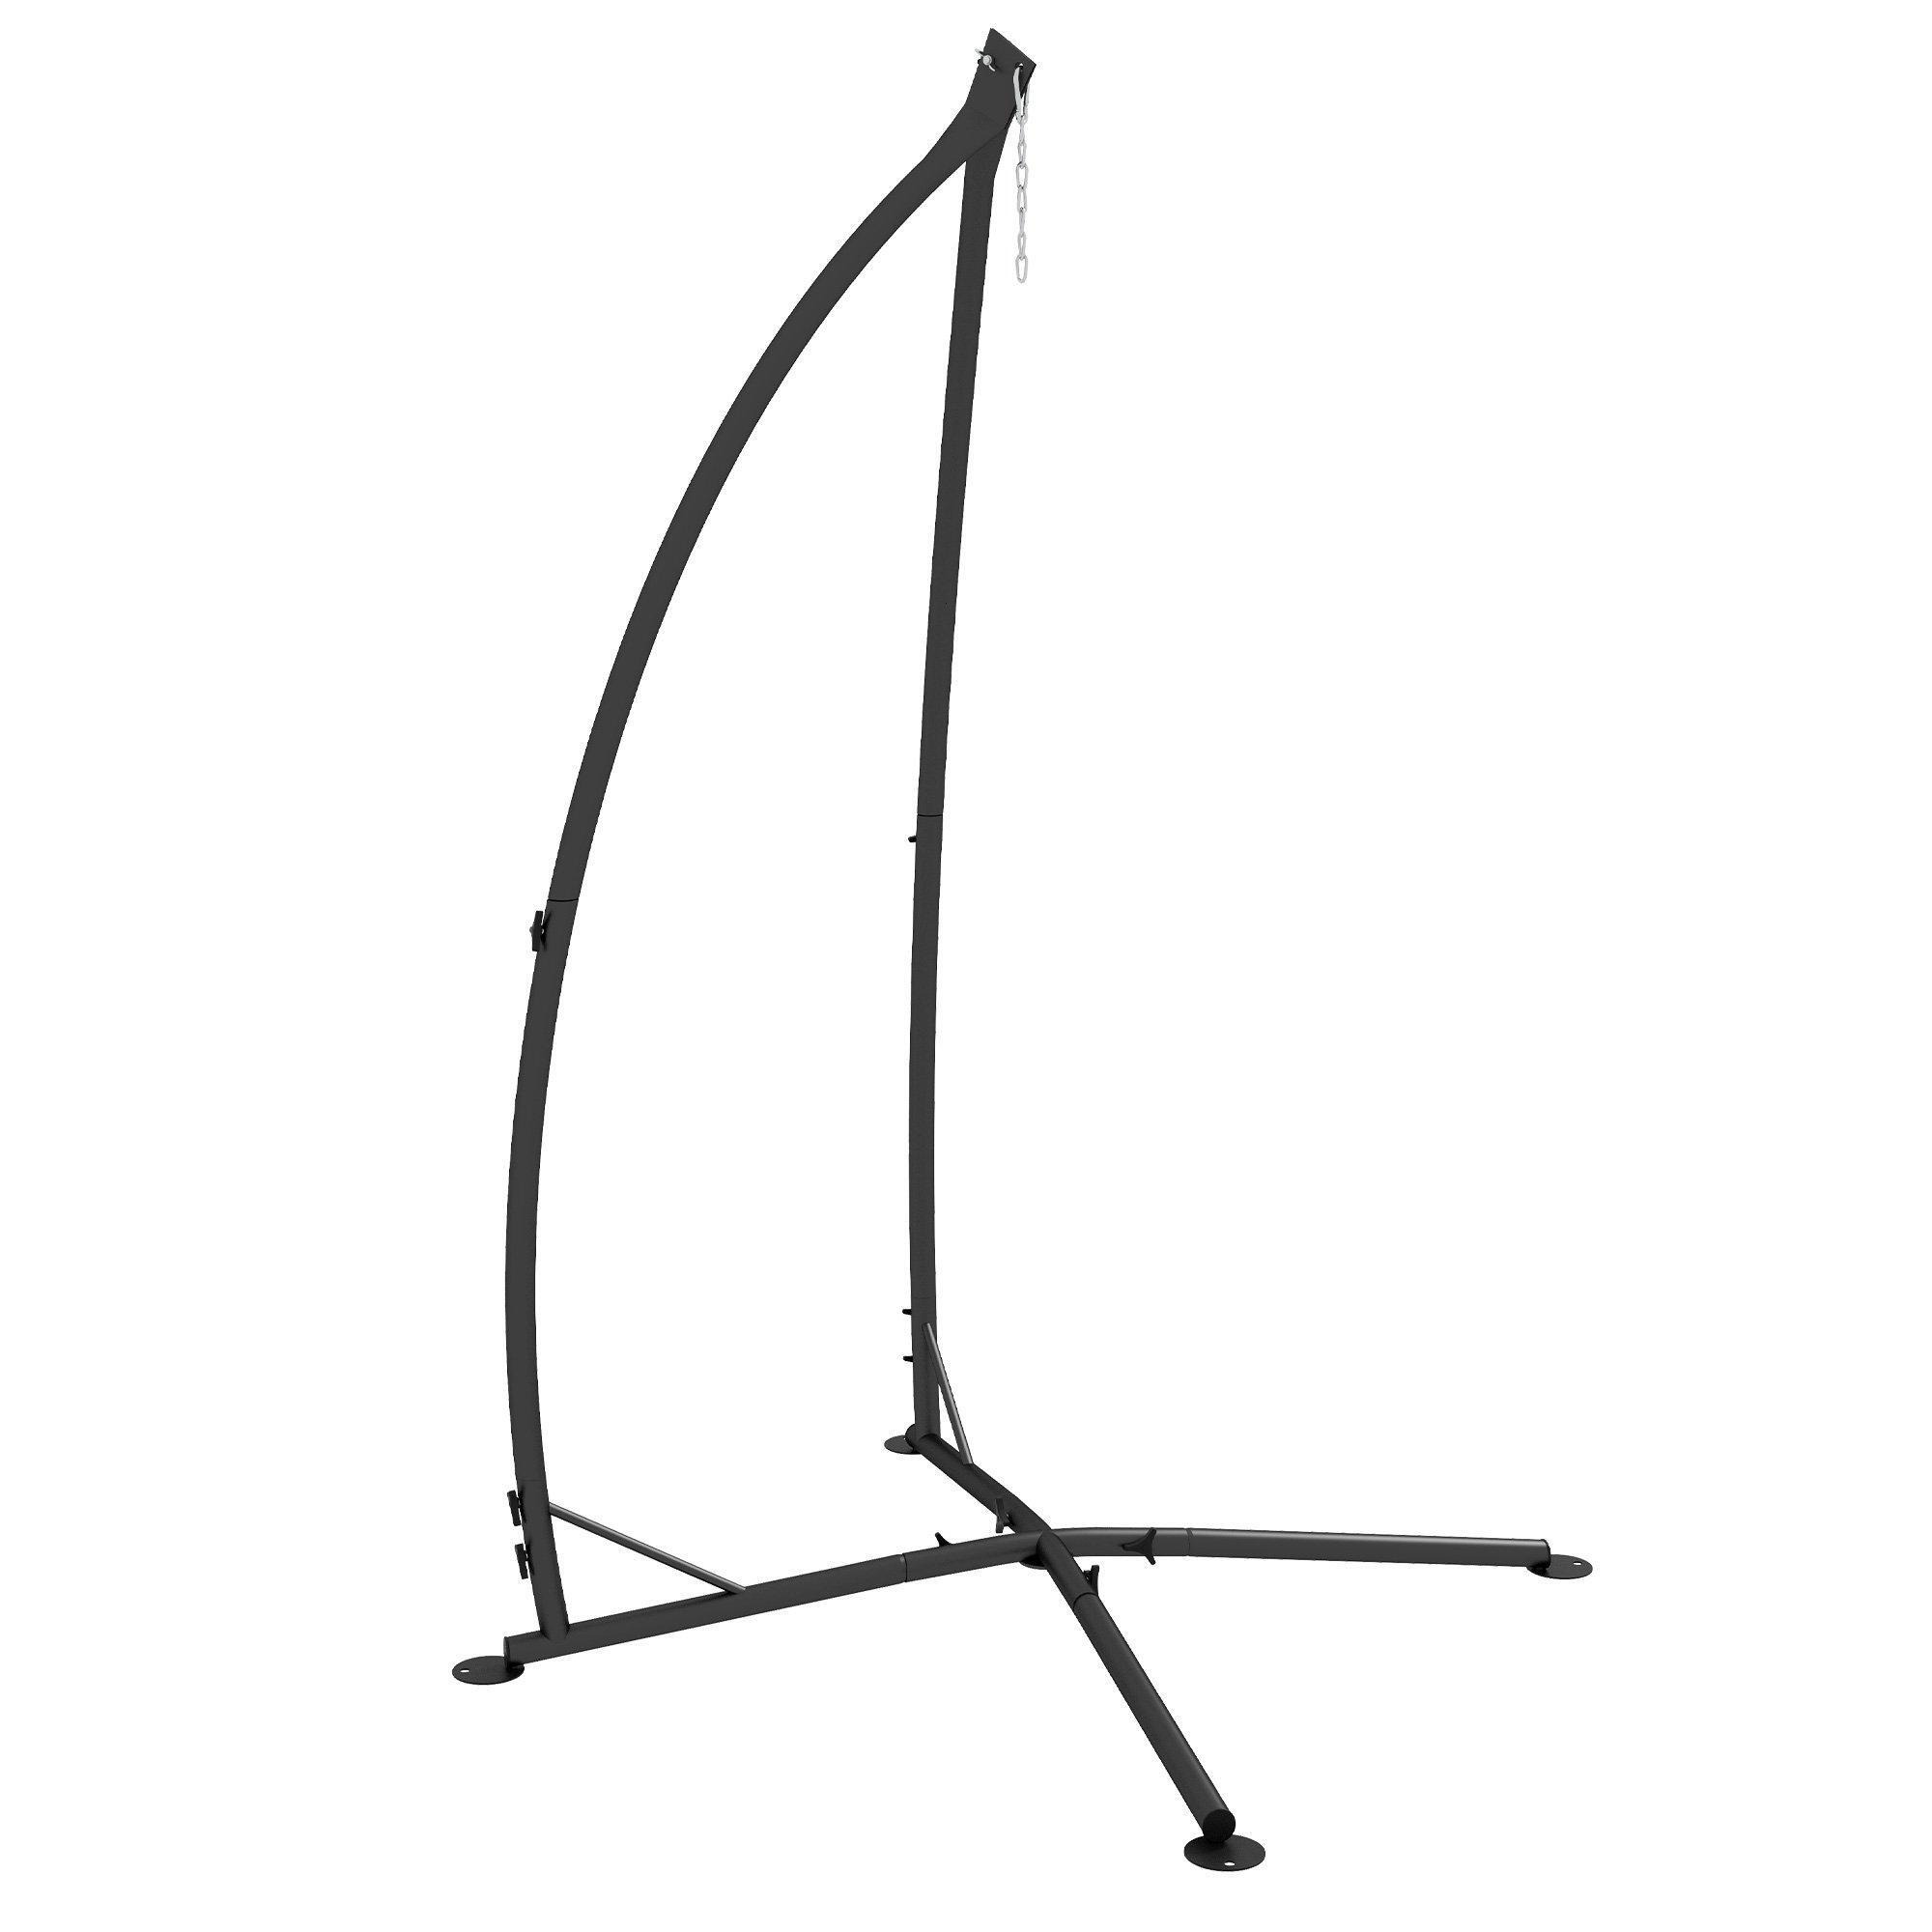 Hammock Chair Stand Metal Frame Hammock Stand for Indoor & Outdoor Use, Black - image 1